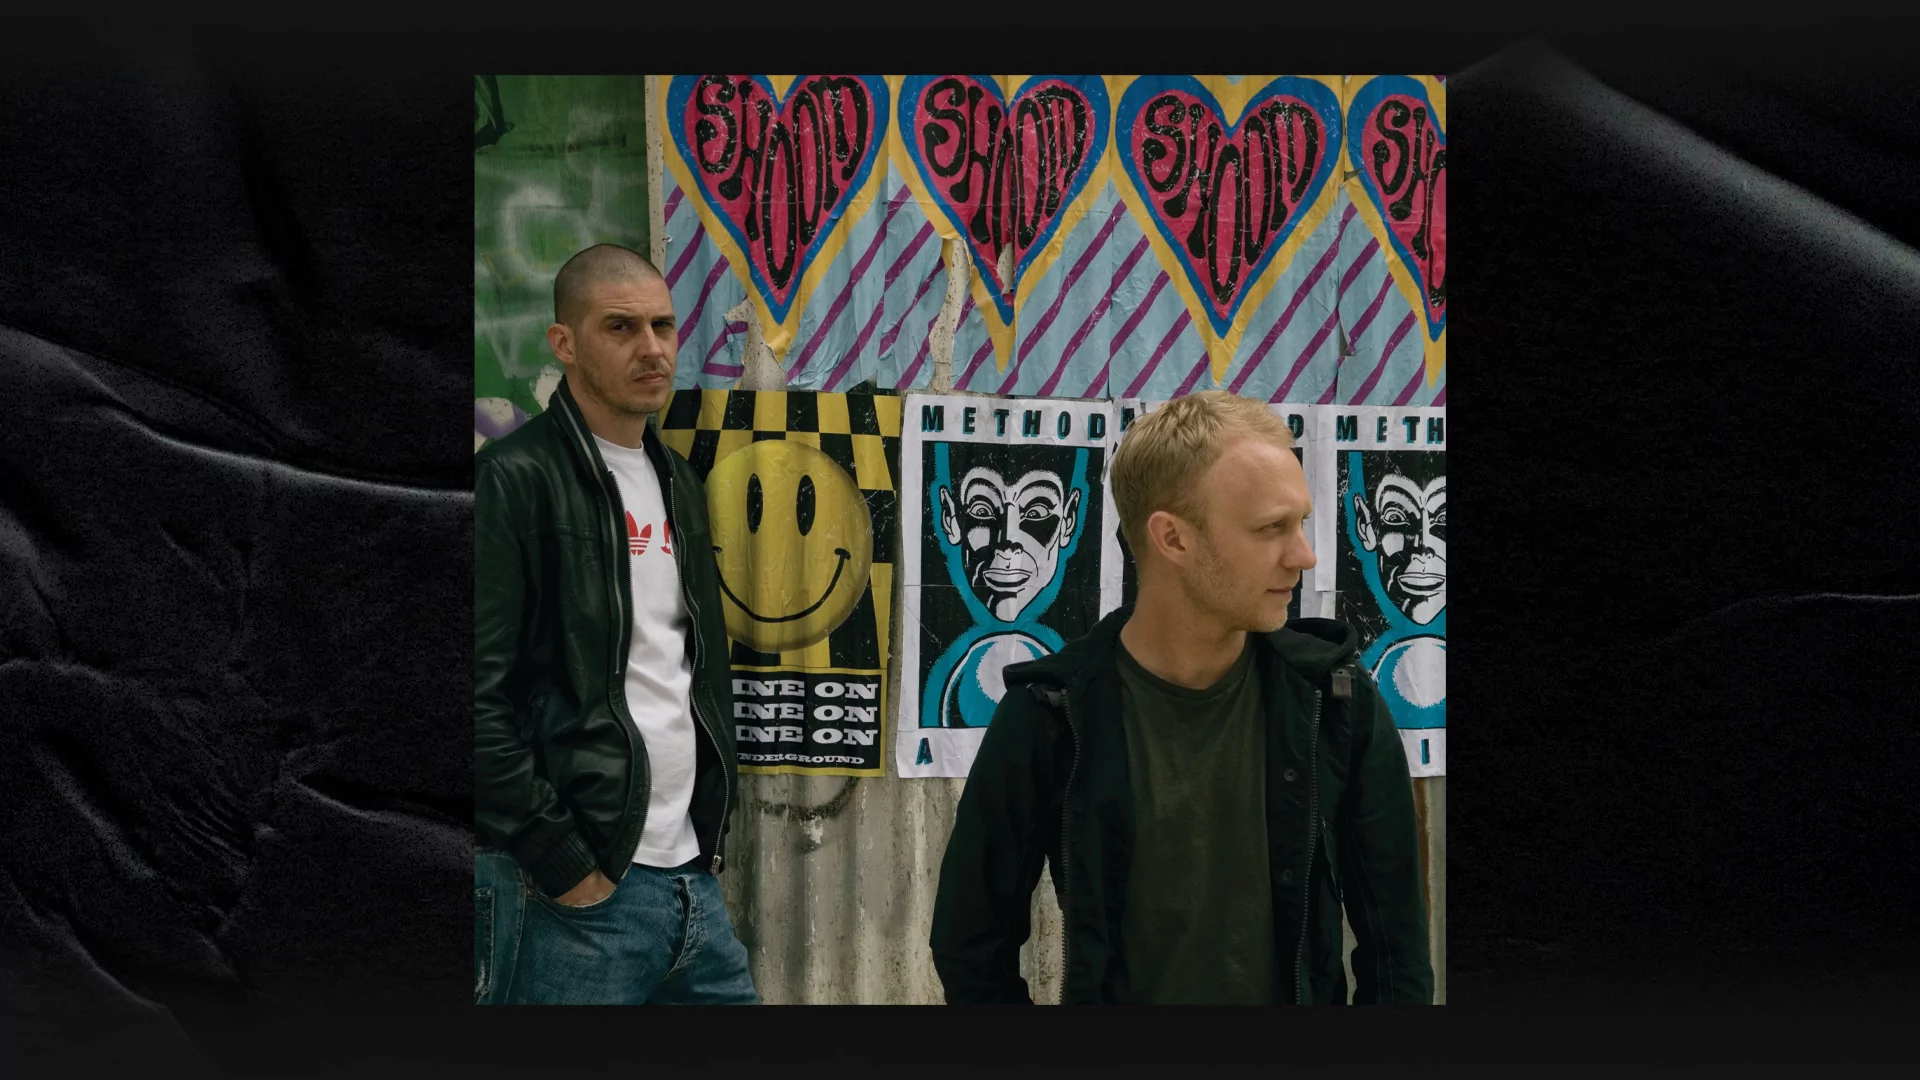  Simon Marlin (left) and Max Reich (right) of Shapeshifters pose in front of graffiti and posters